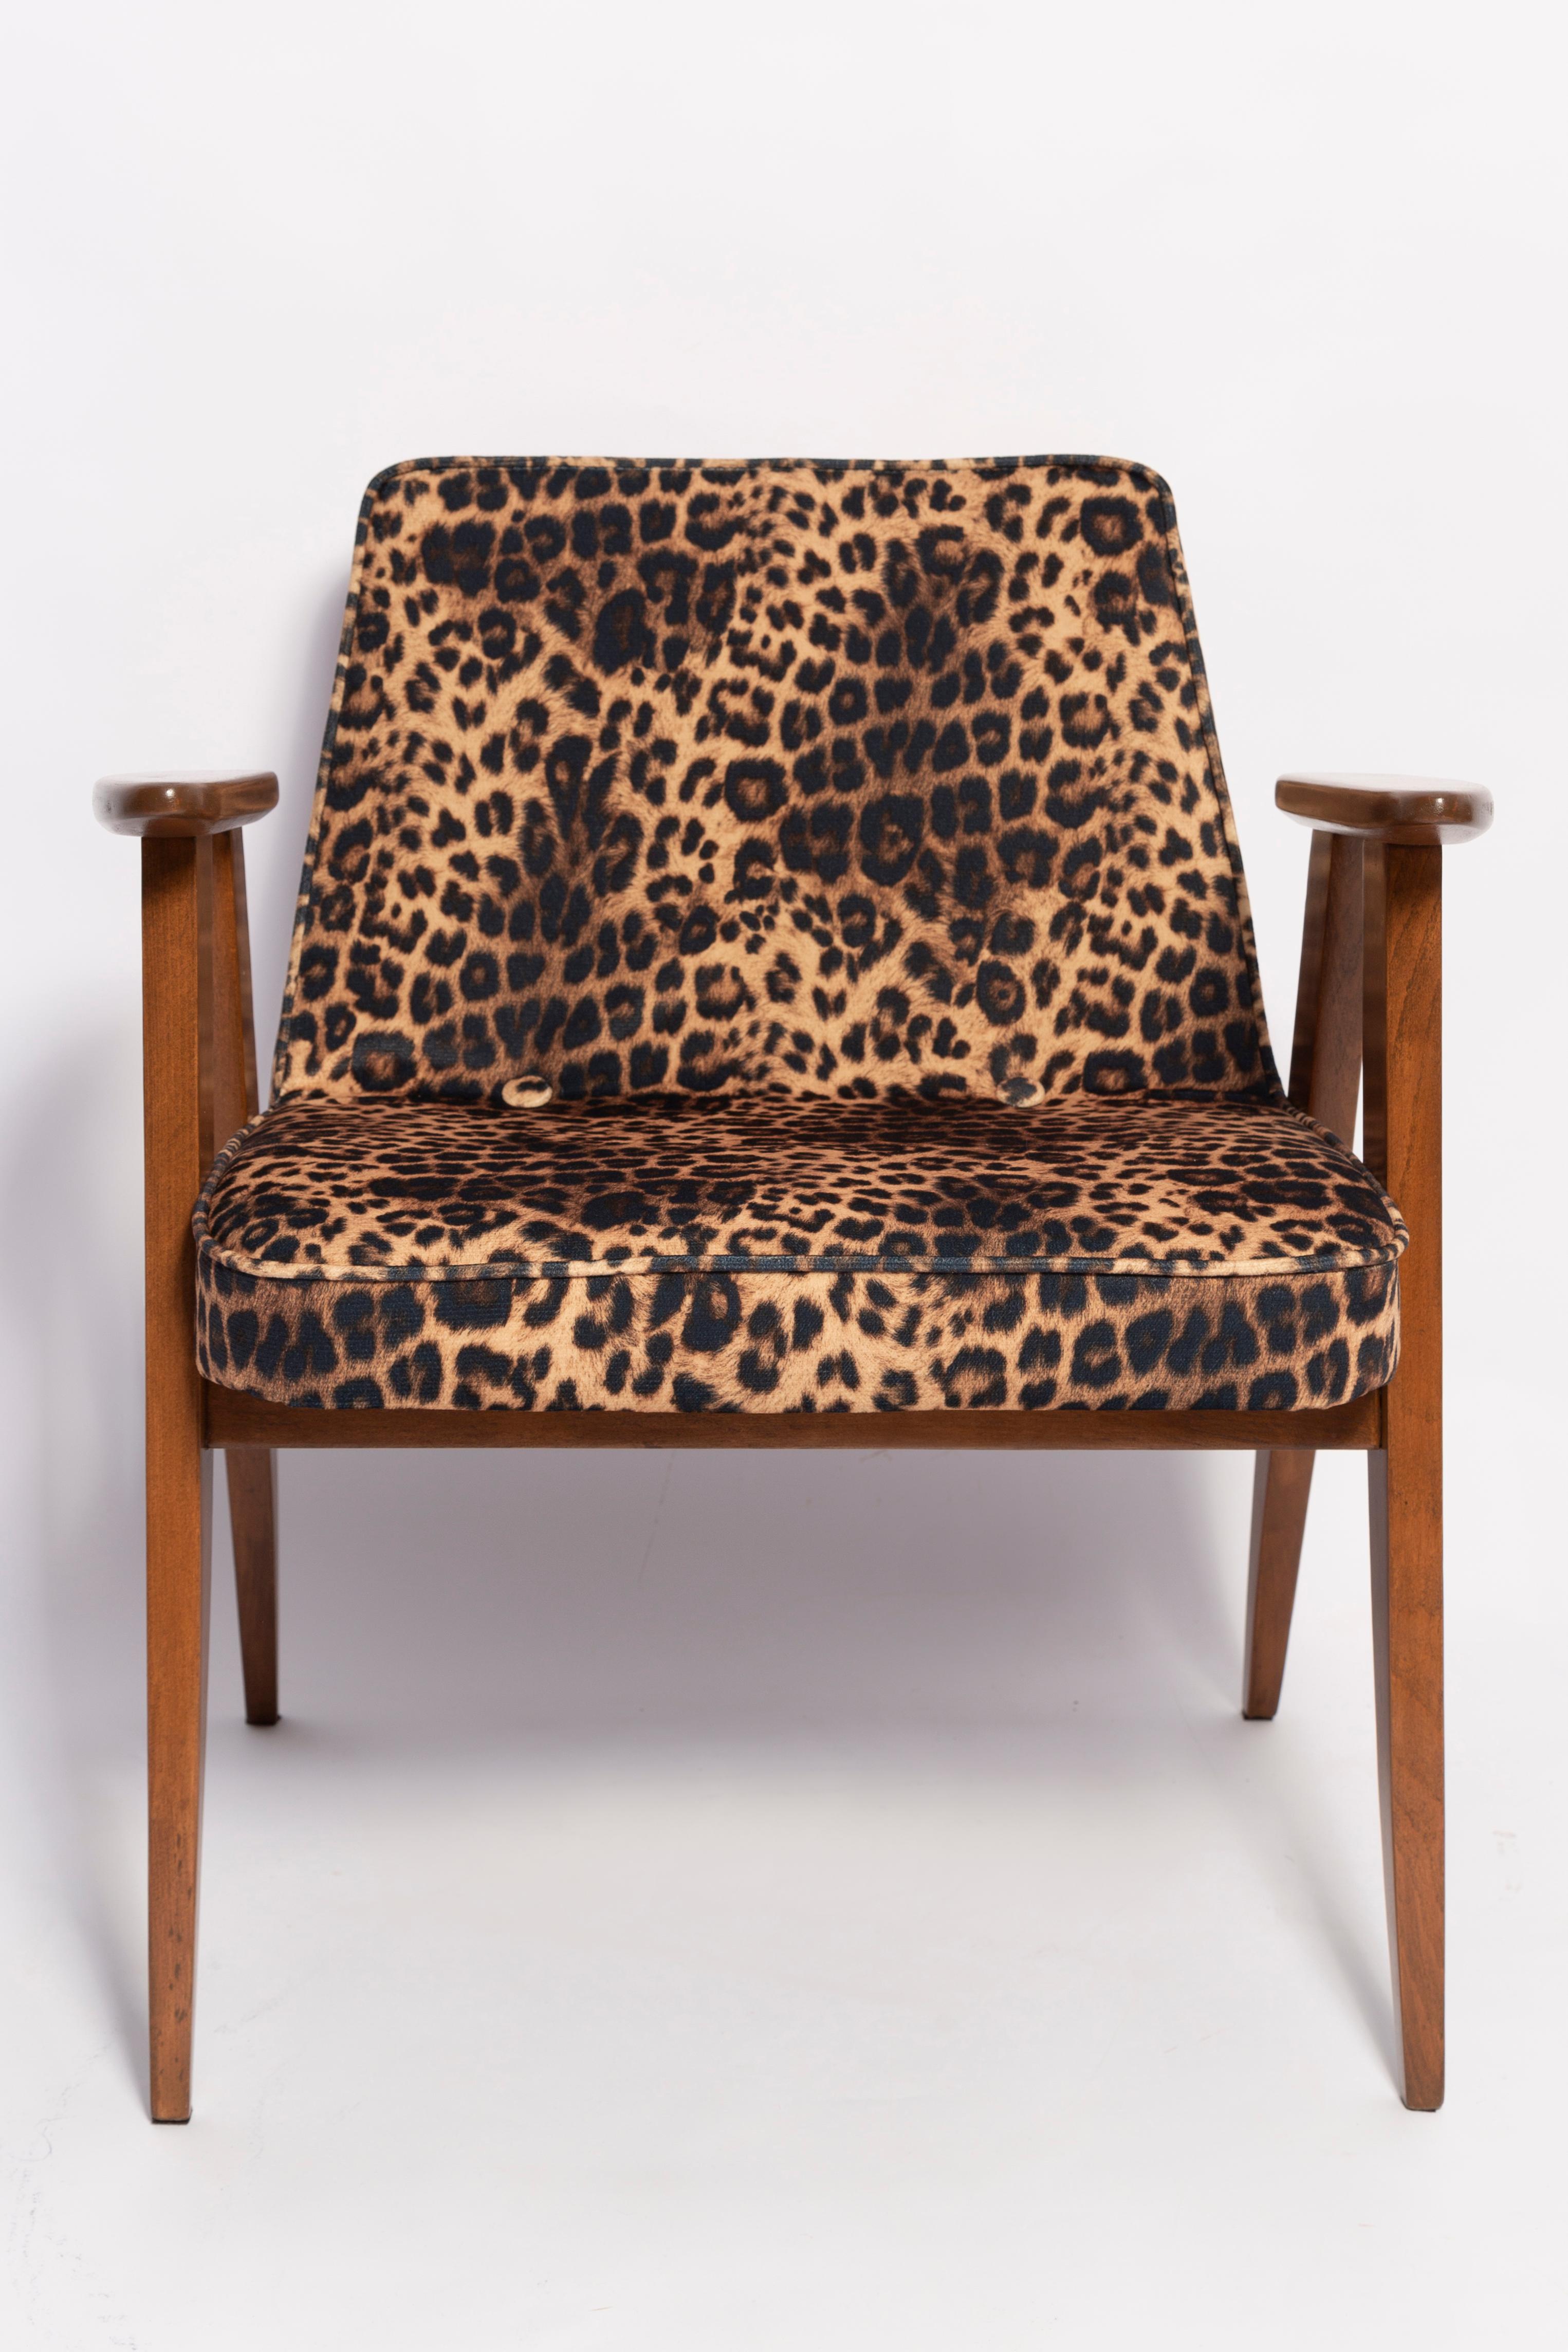 Two Mid Century 366 Armchairs in Leopard Print Velvet, Jozef Chierowski, 1960s For Sale 4